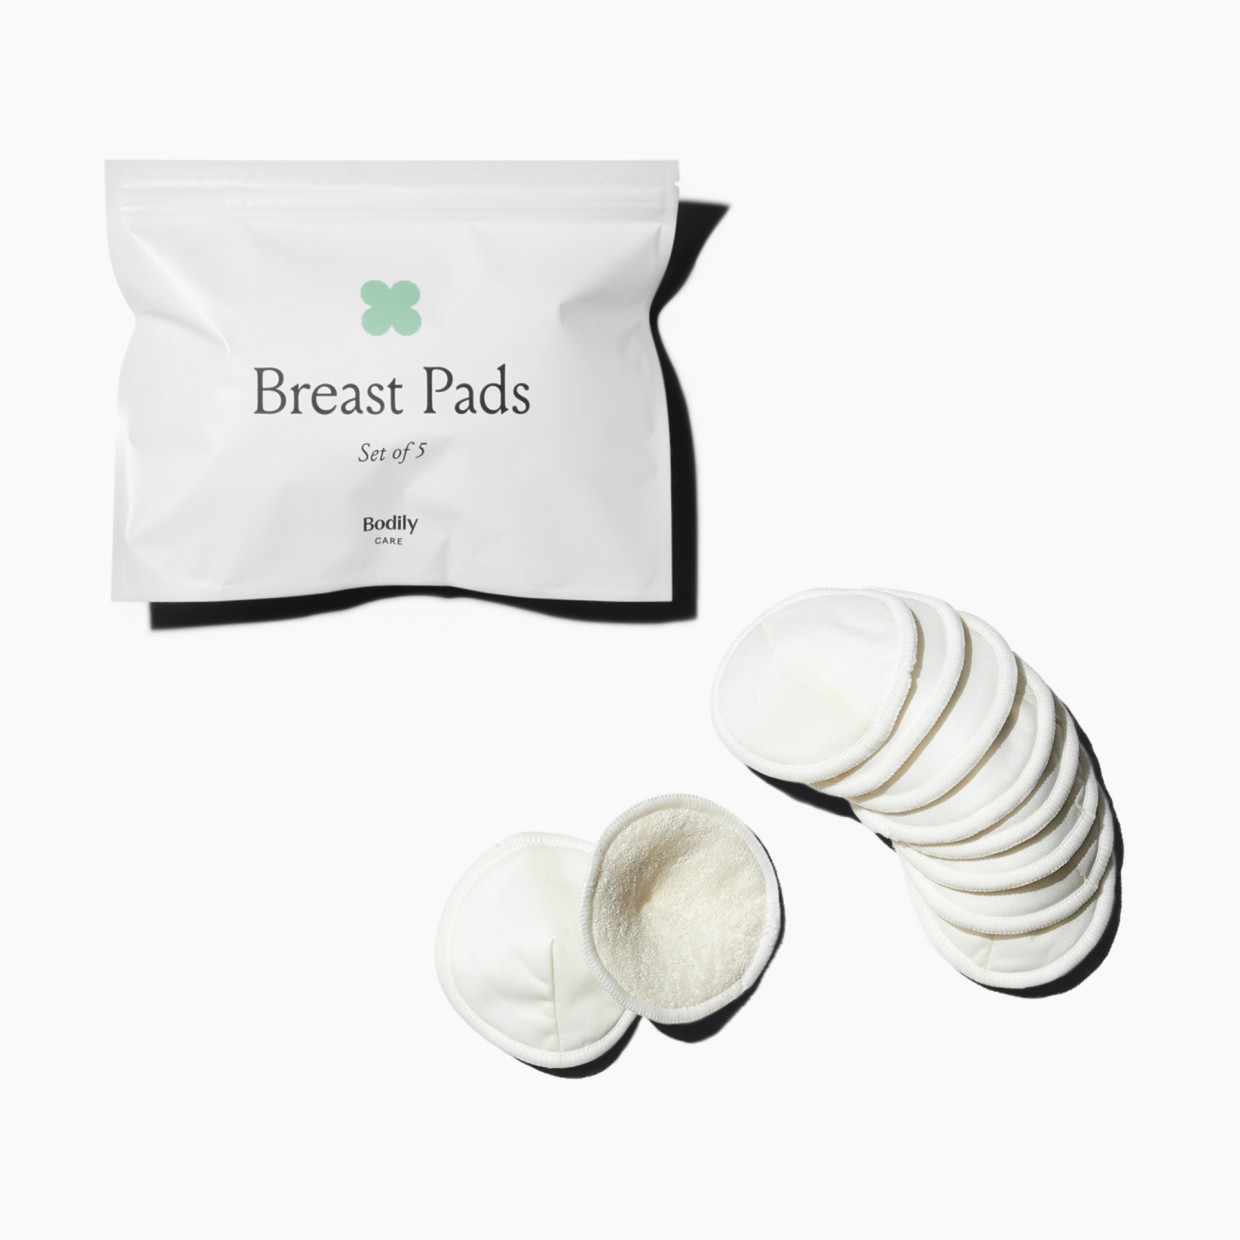 Bodily Organic Bamboo Breast Pads (5 Pairs).